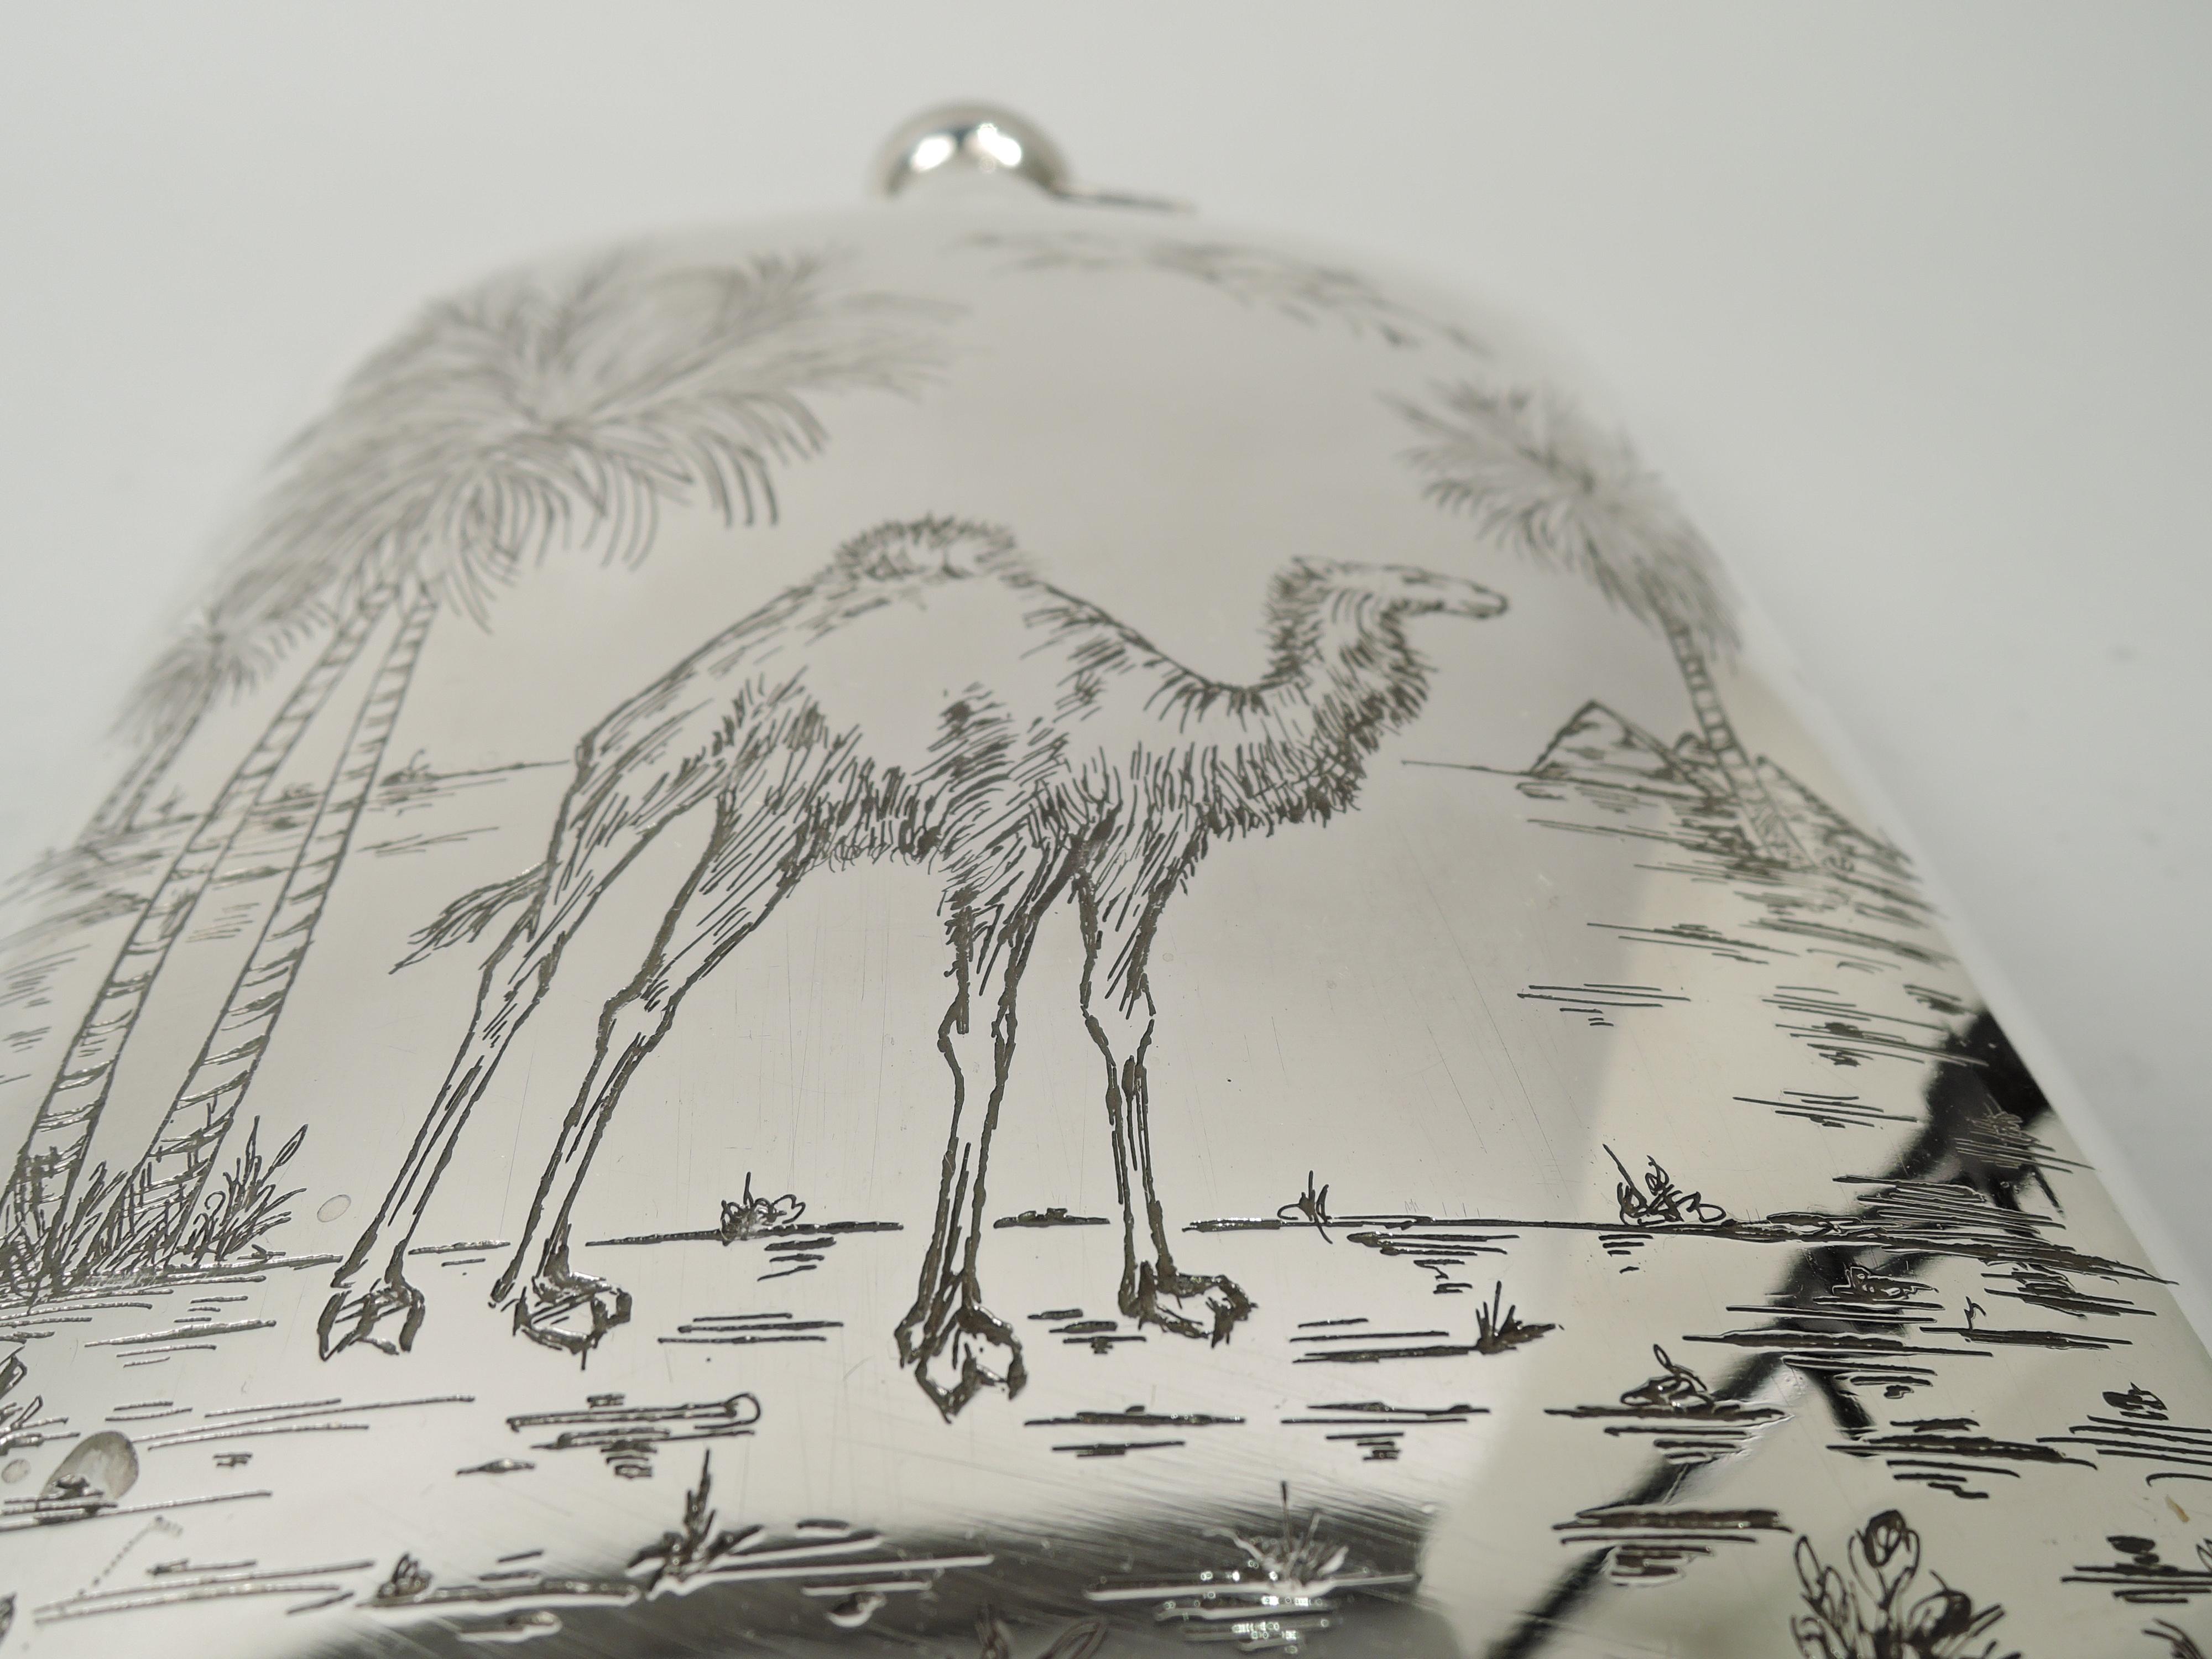 American Modern sterling silver flask, ca 1920. Rectilinear and curved; cover hinged, threaded, and cork-lined. Front engraved with a camel, a paragon of drought survival, standing on parched ground with scattered shoots of greenery. In background